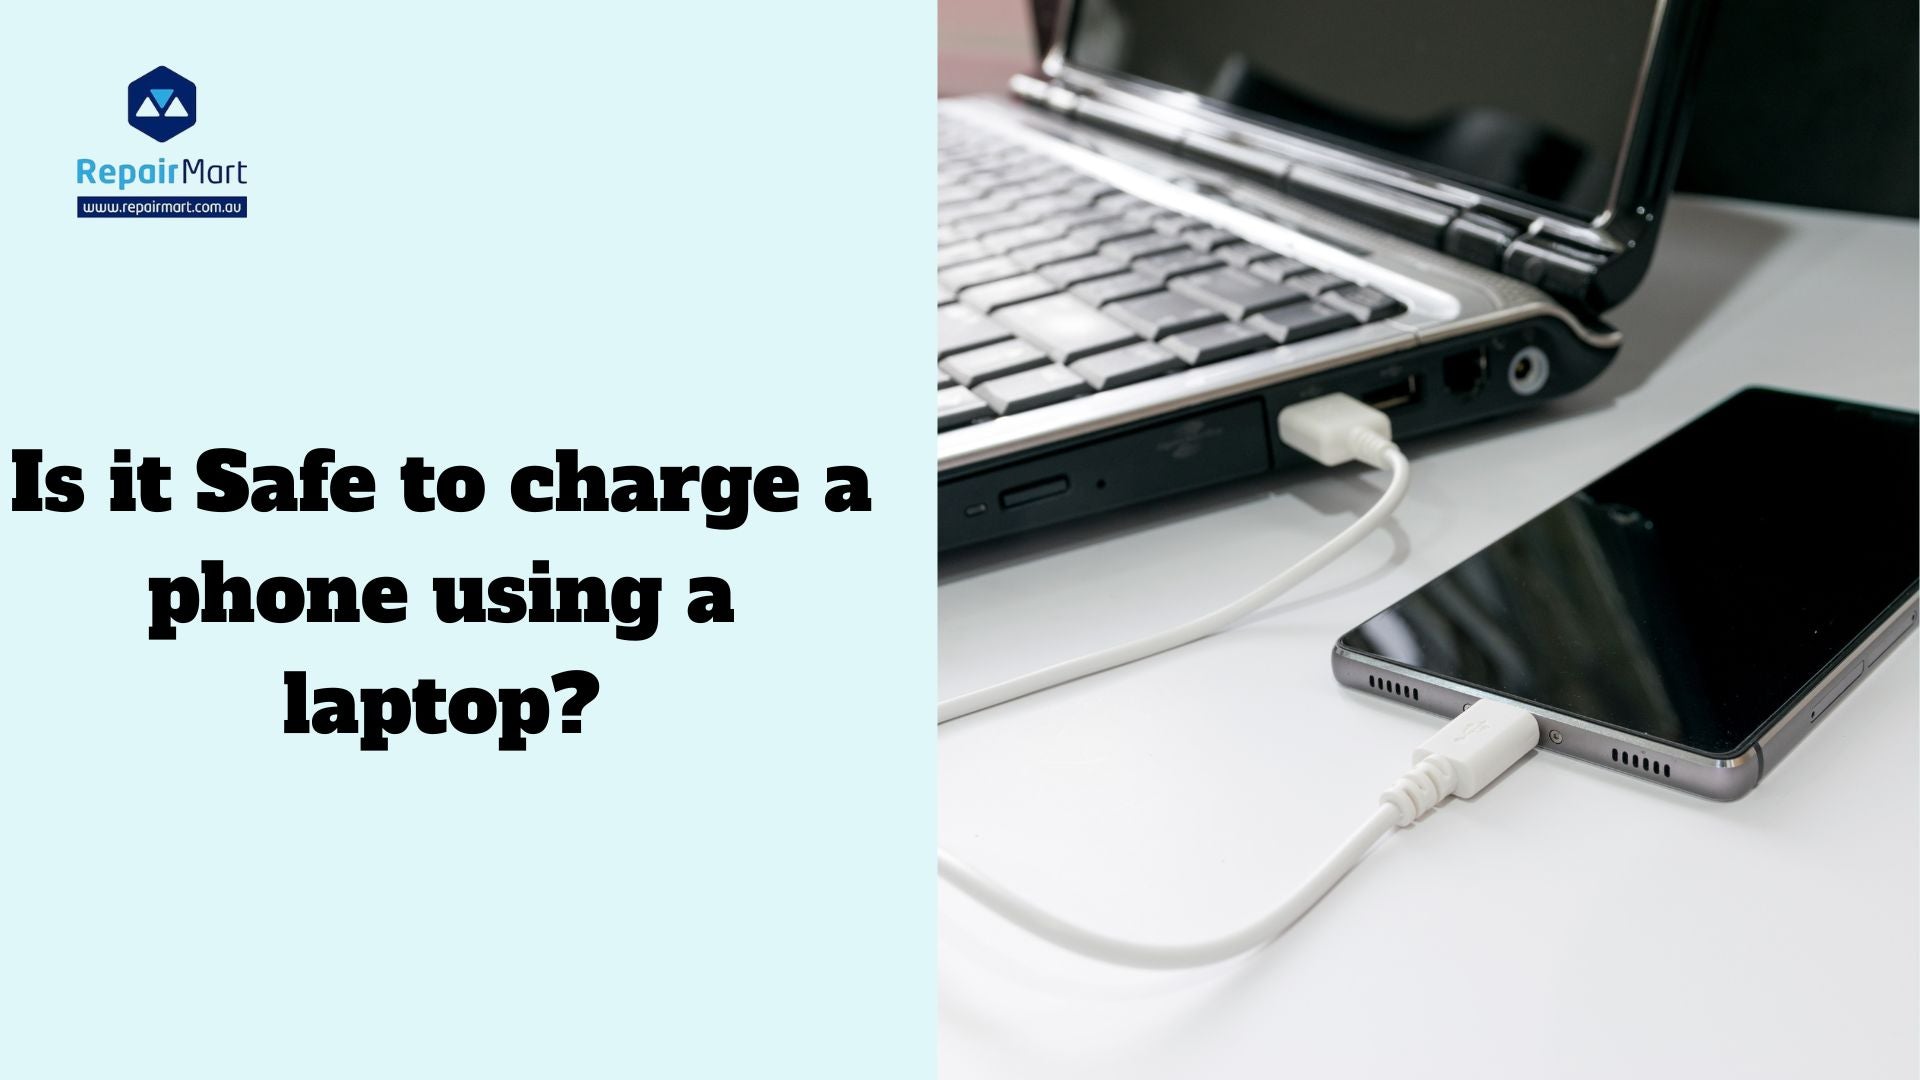 Is it Safe to charge a phone using a laptop?